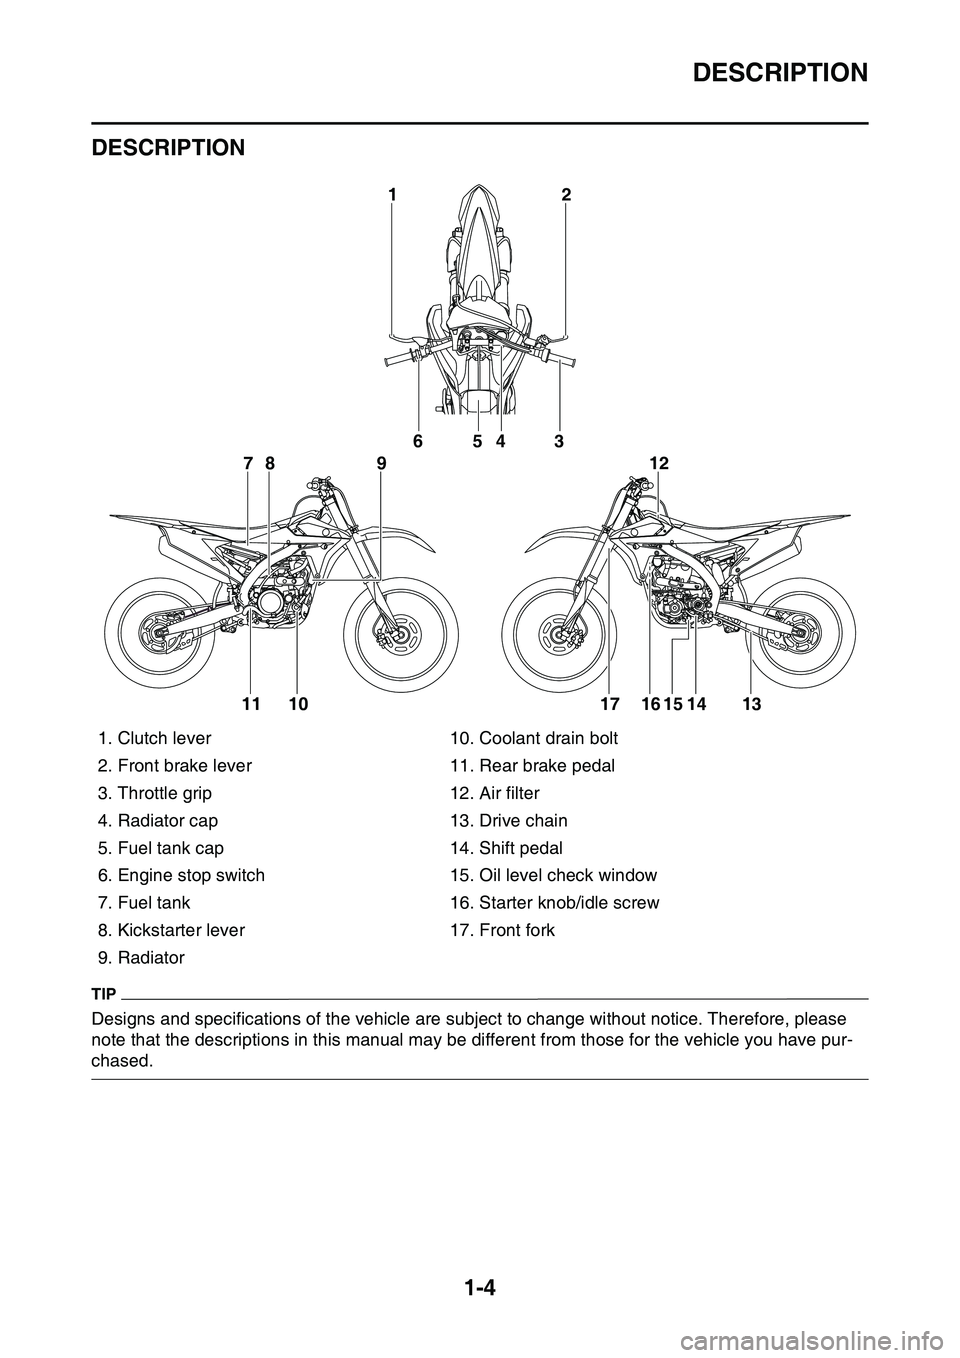 YAMAHA YZ450F 2014  Owners Manual DESCRIPTION
1-4
EAS1SL1009
DESCRIPTION
TIP
Designs and specifications of the vehicle are subject to change without notice. Therefore, please 
note that the descriptions in this manual may be different